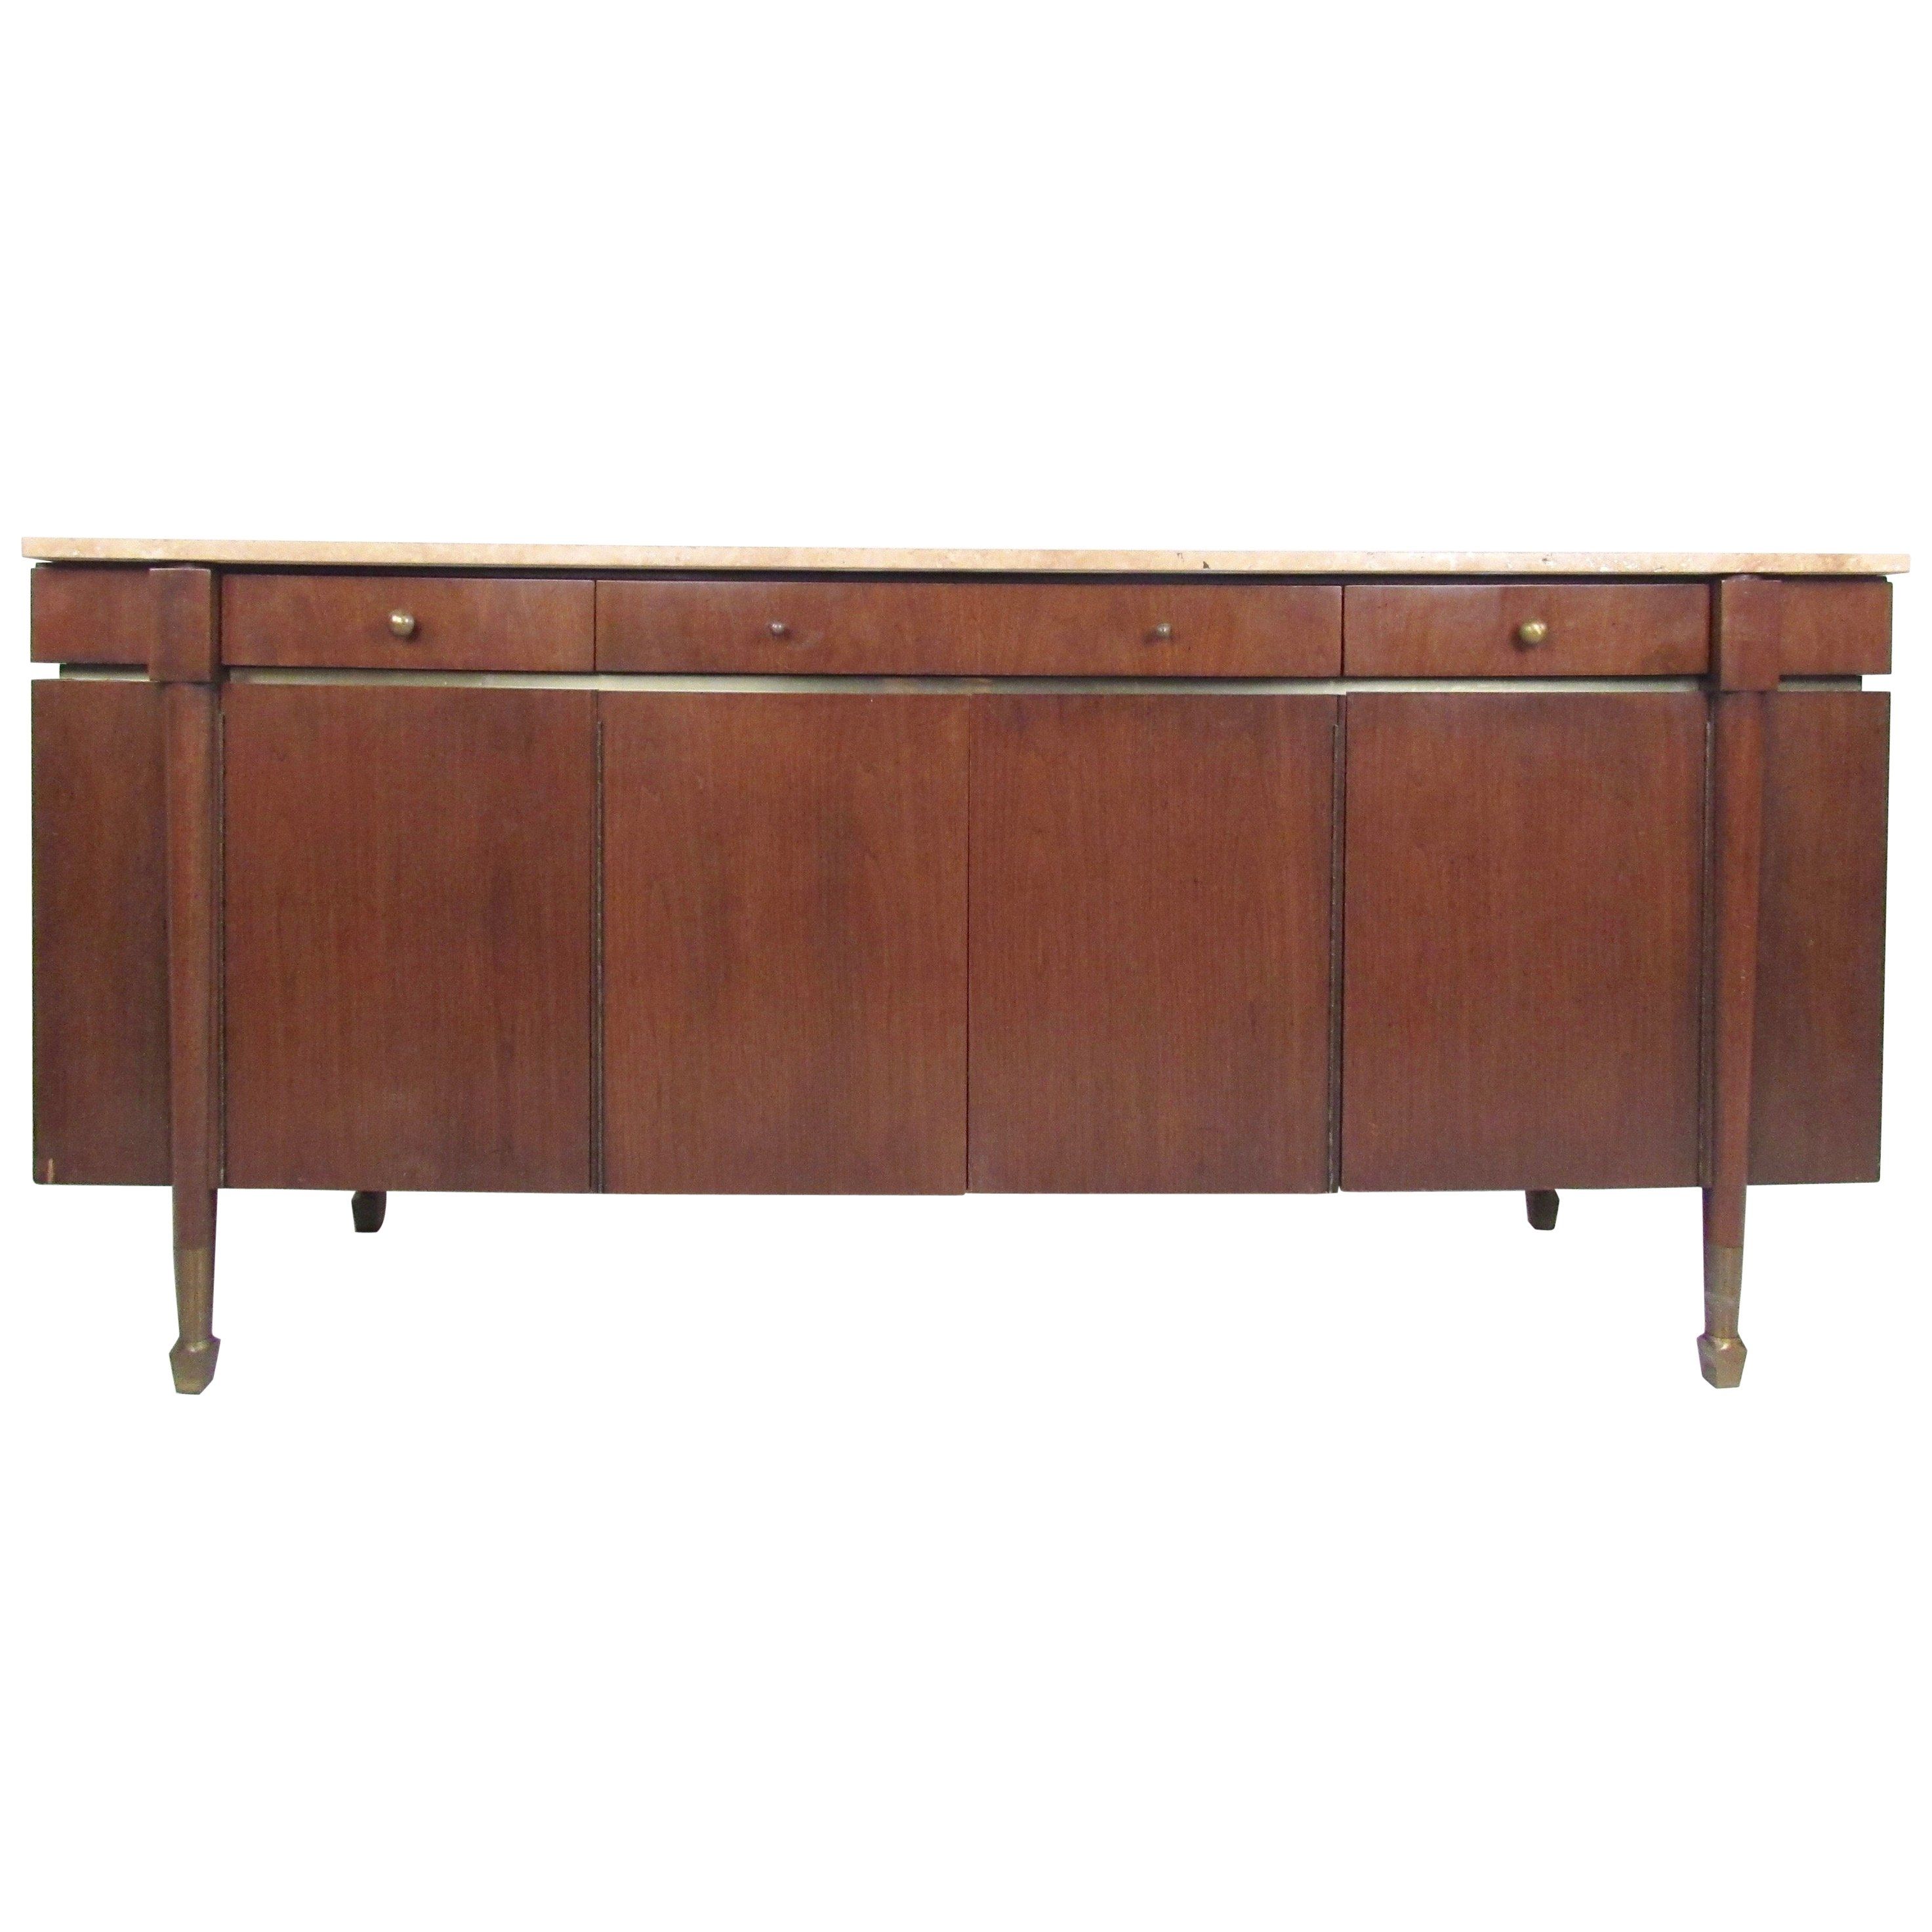 Striking 'intarsia' Sideboard With A Vintage Designaldo Rossi With Regard To Rossi Large Sideboards (View 3 of 30)